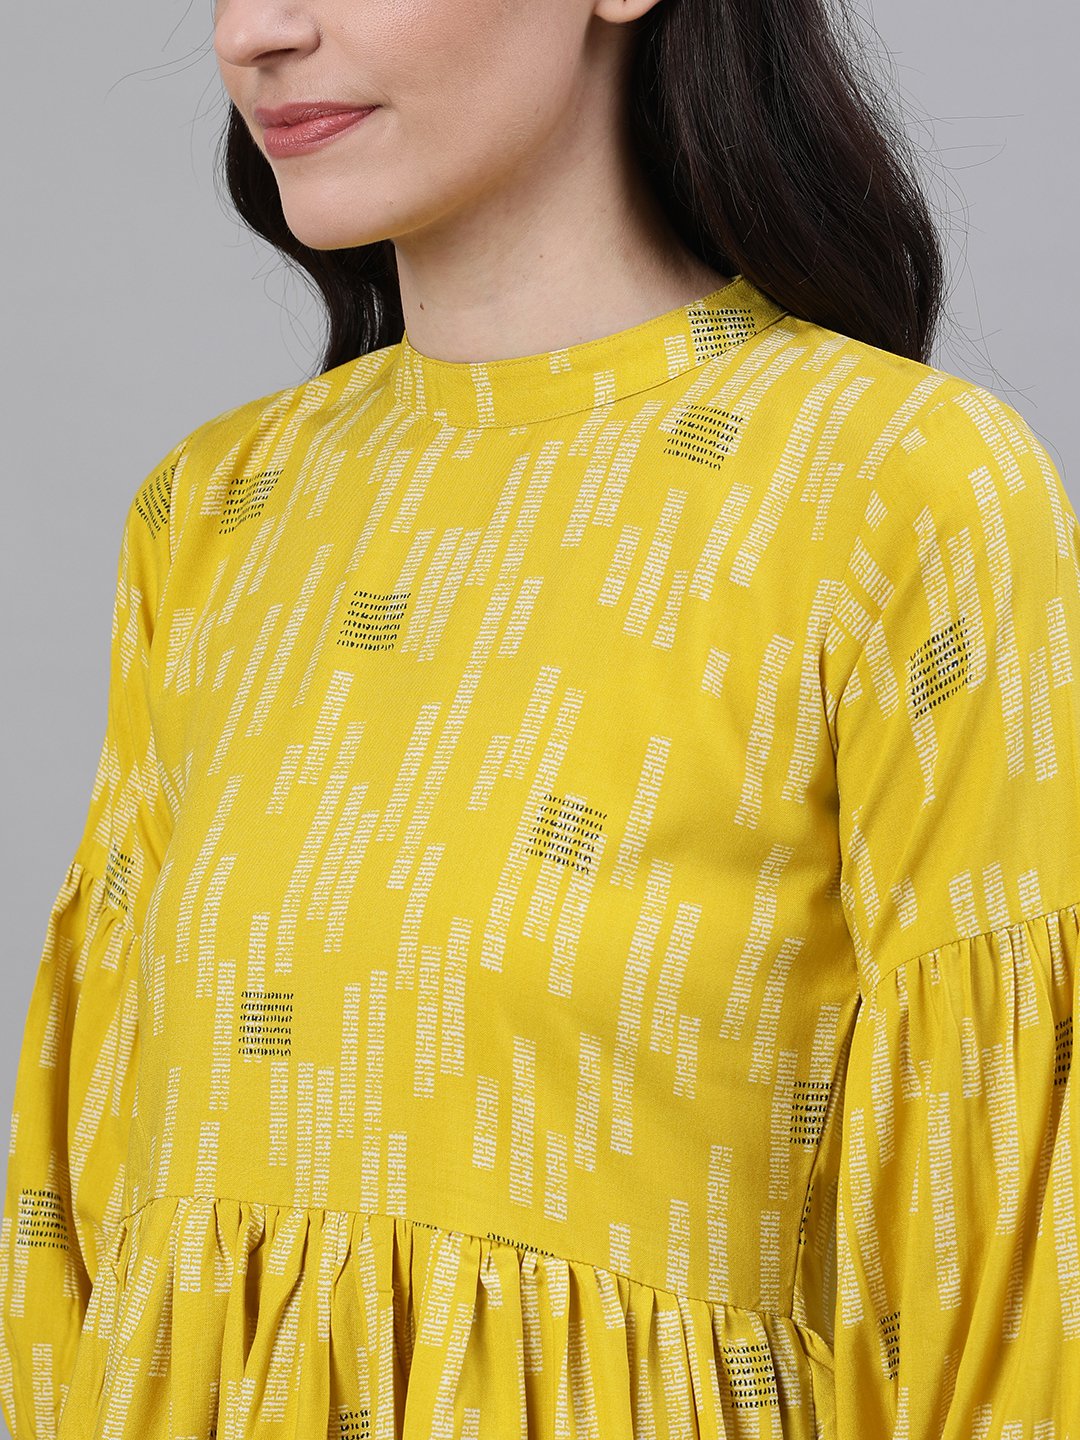 Women's Yellow Three-Quarter Sleeves Gathered Or Pleated Top - Nayo Clothing